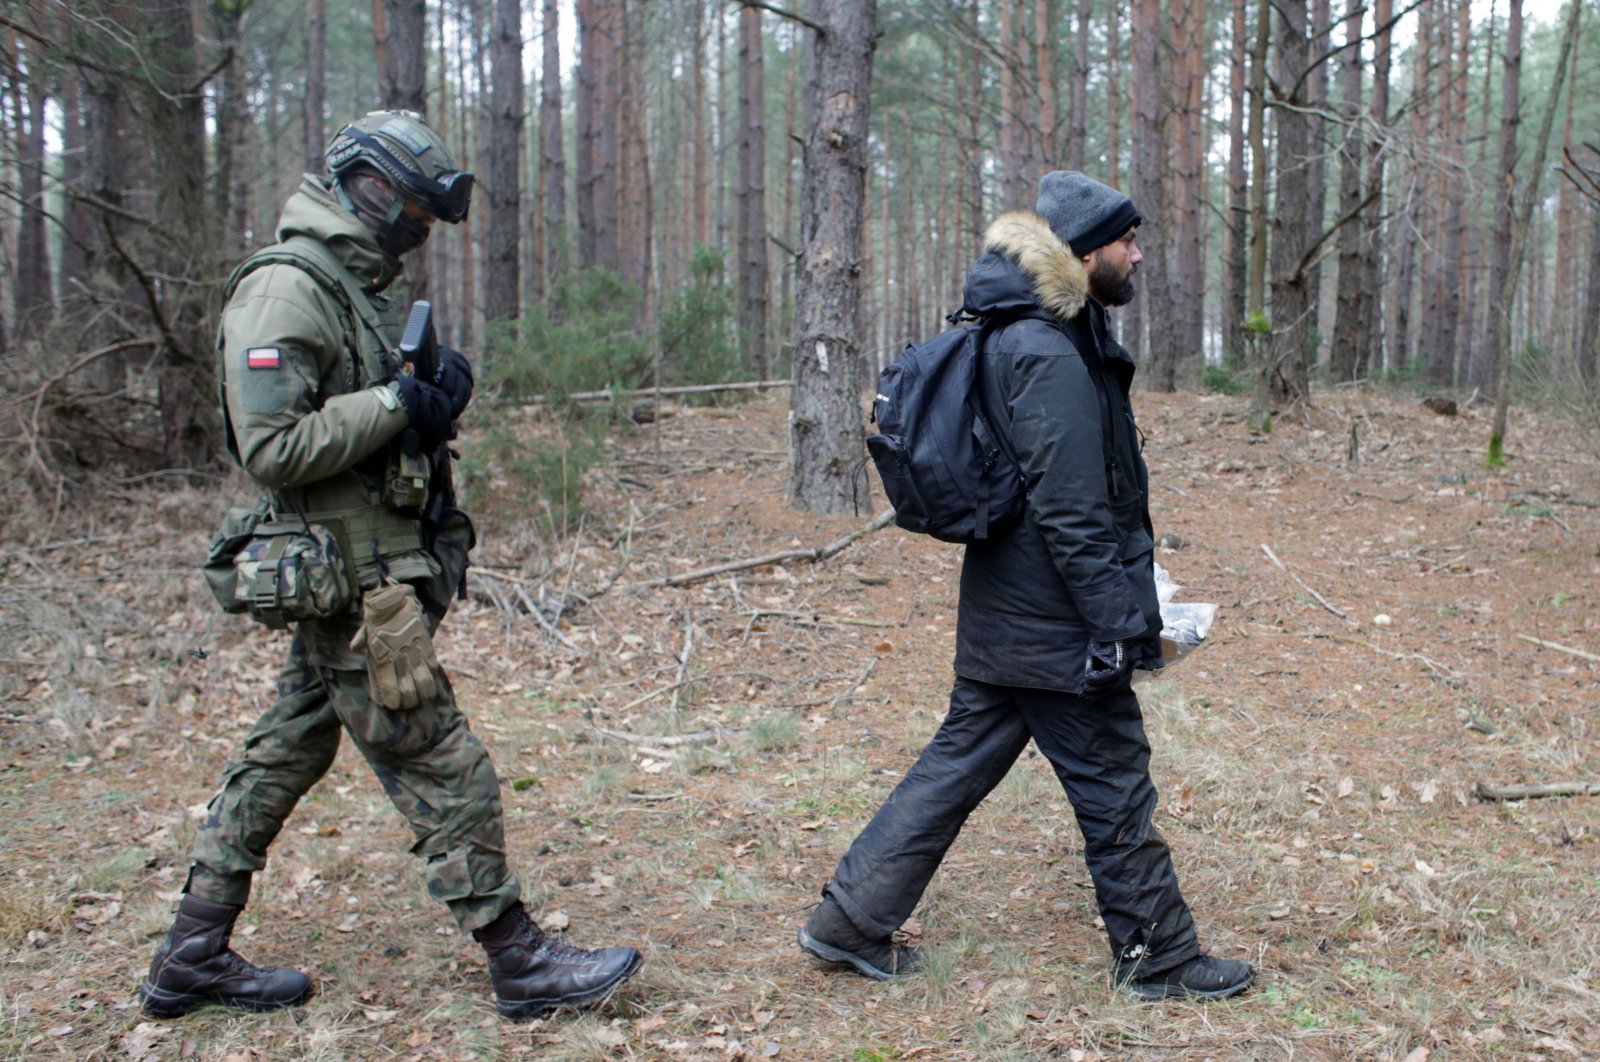 A soldier walks behind Iraqi migrant Salih Remitdh, 41, from Basra, who asked the border guards for international protection after being found in the woods by volunteers, close to the Milejczyce village, Poland, Nov. 26, 2021. (Reuters Photo)